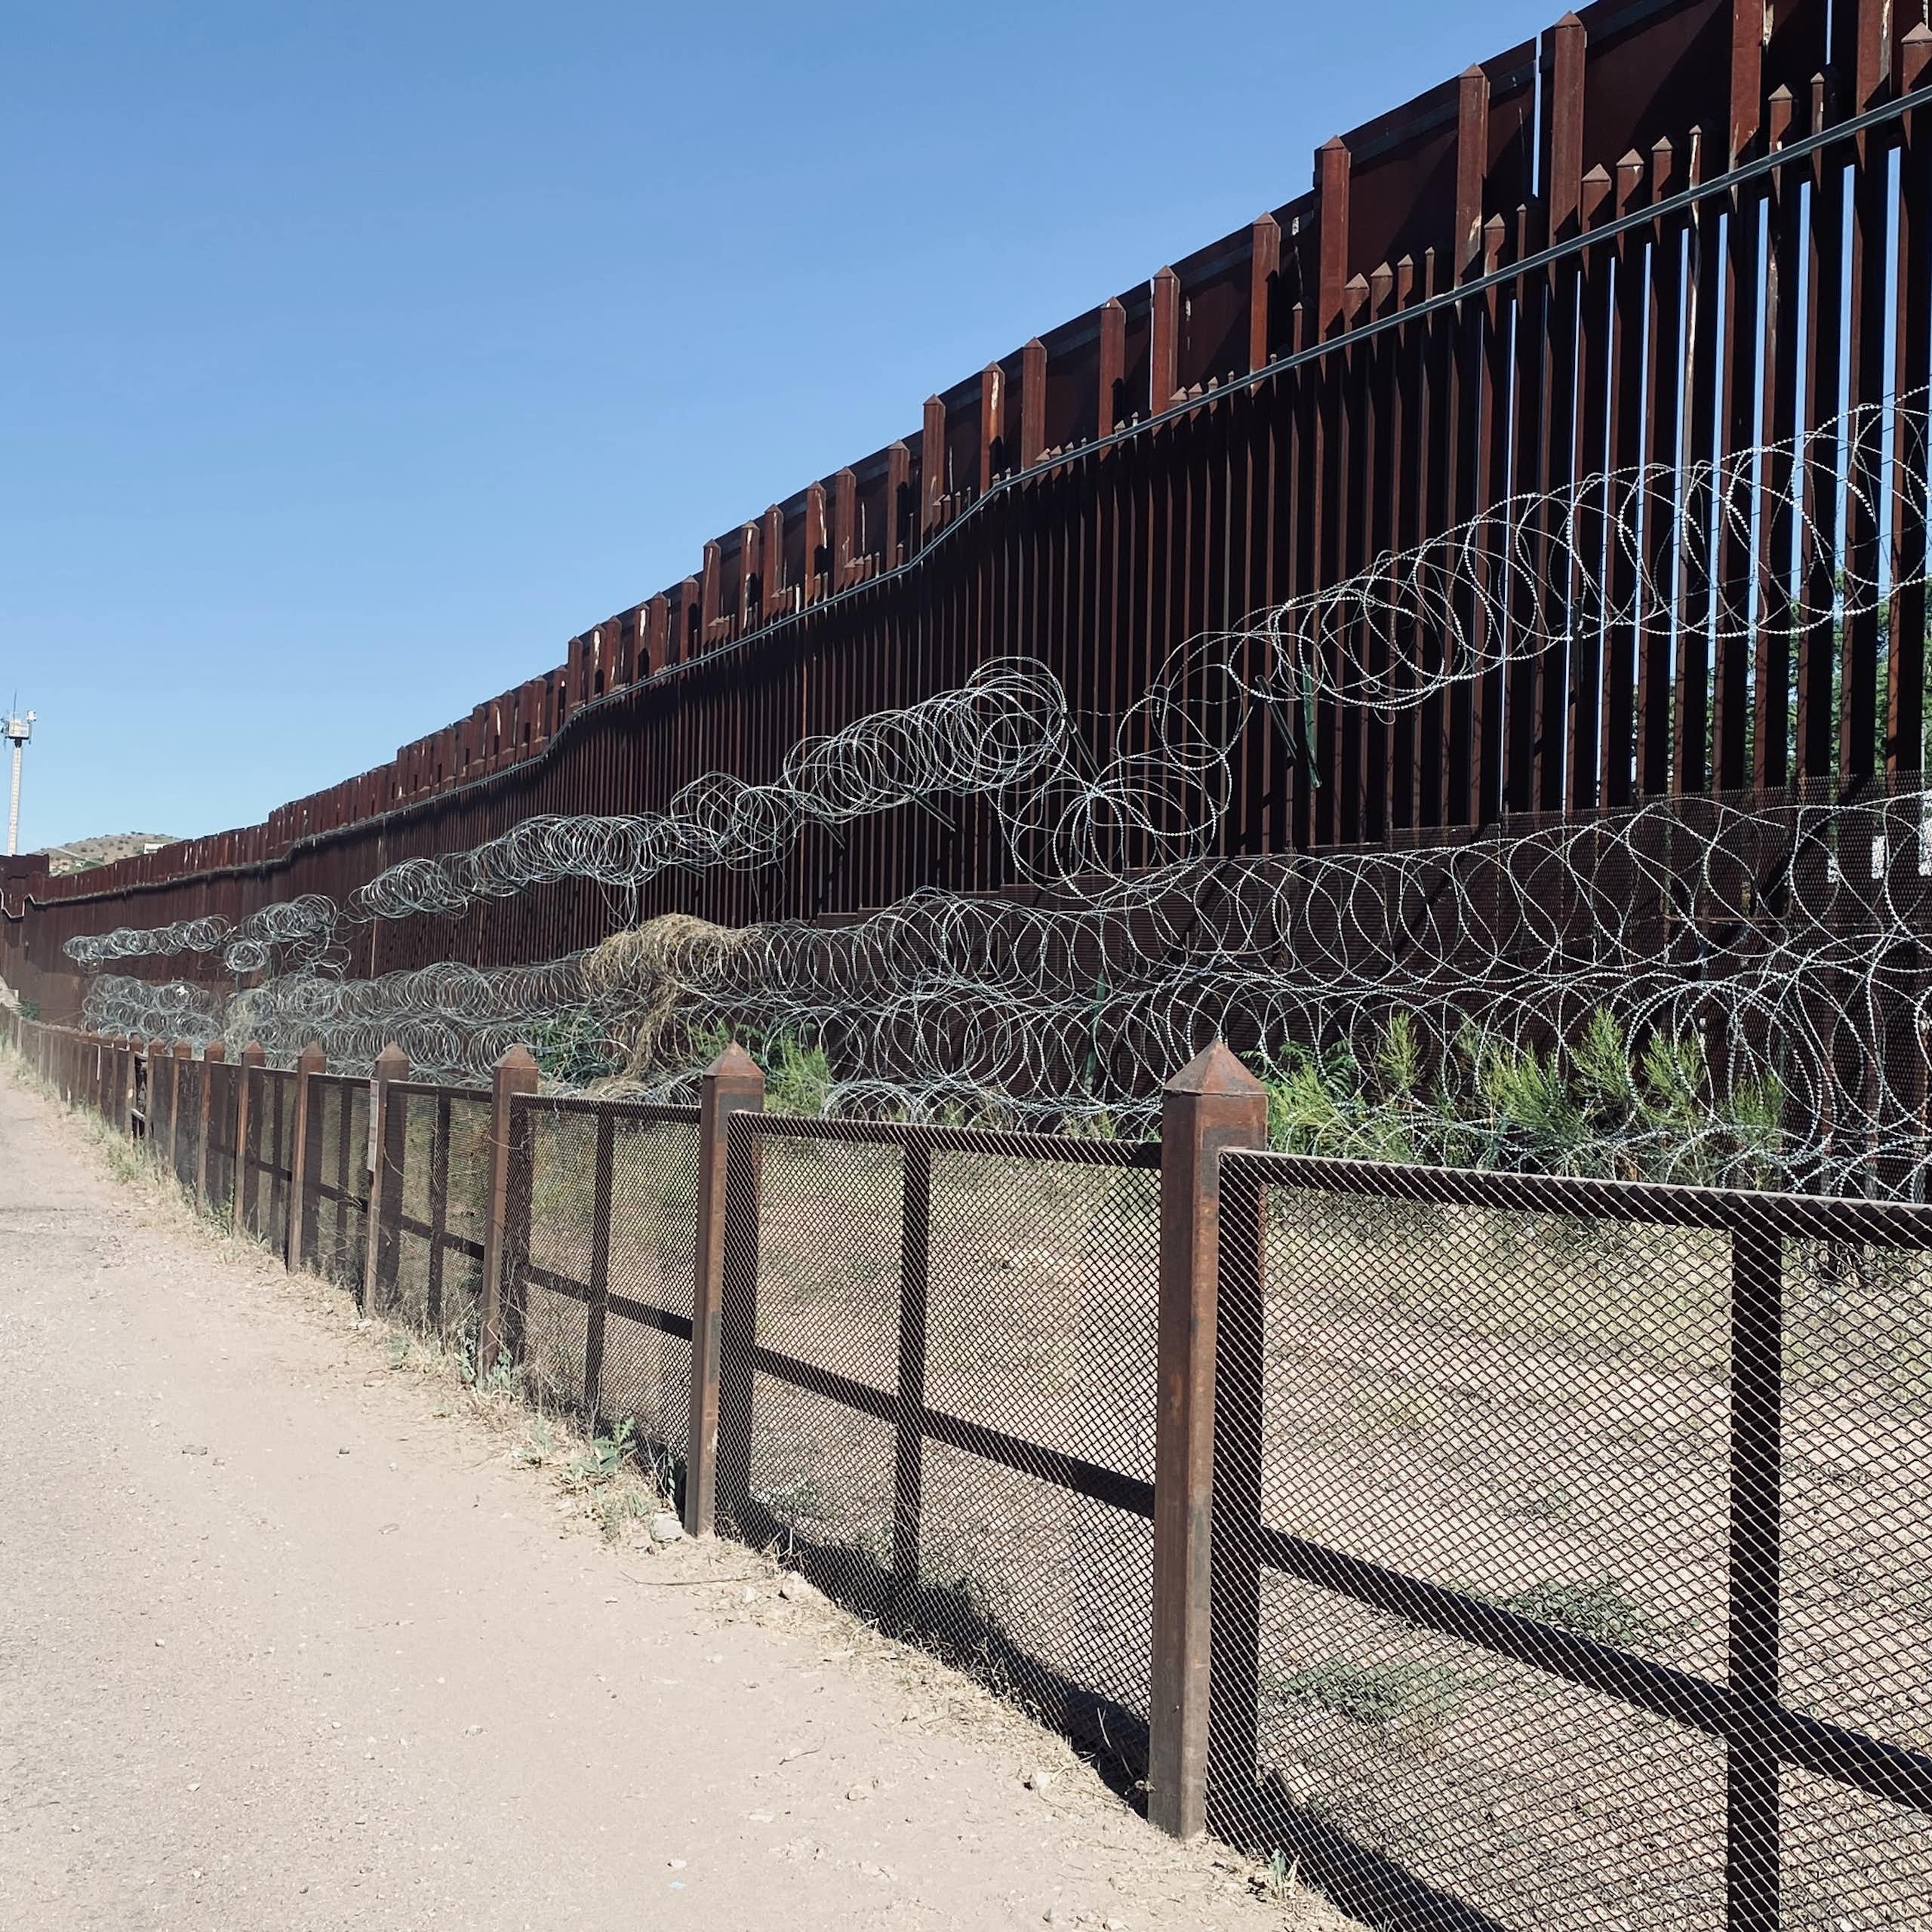 Deadly border technologies are increasingly employed to violently deter migration